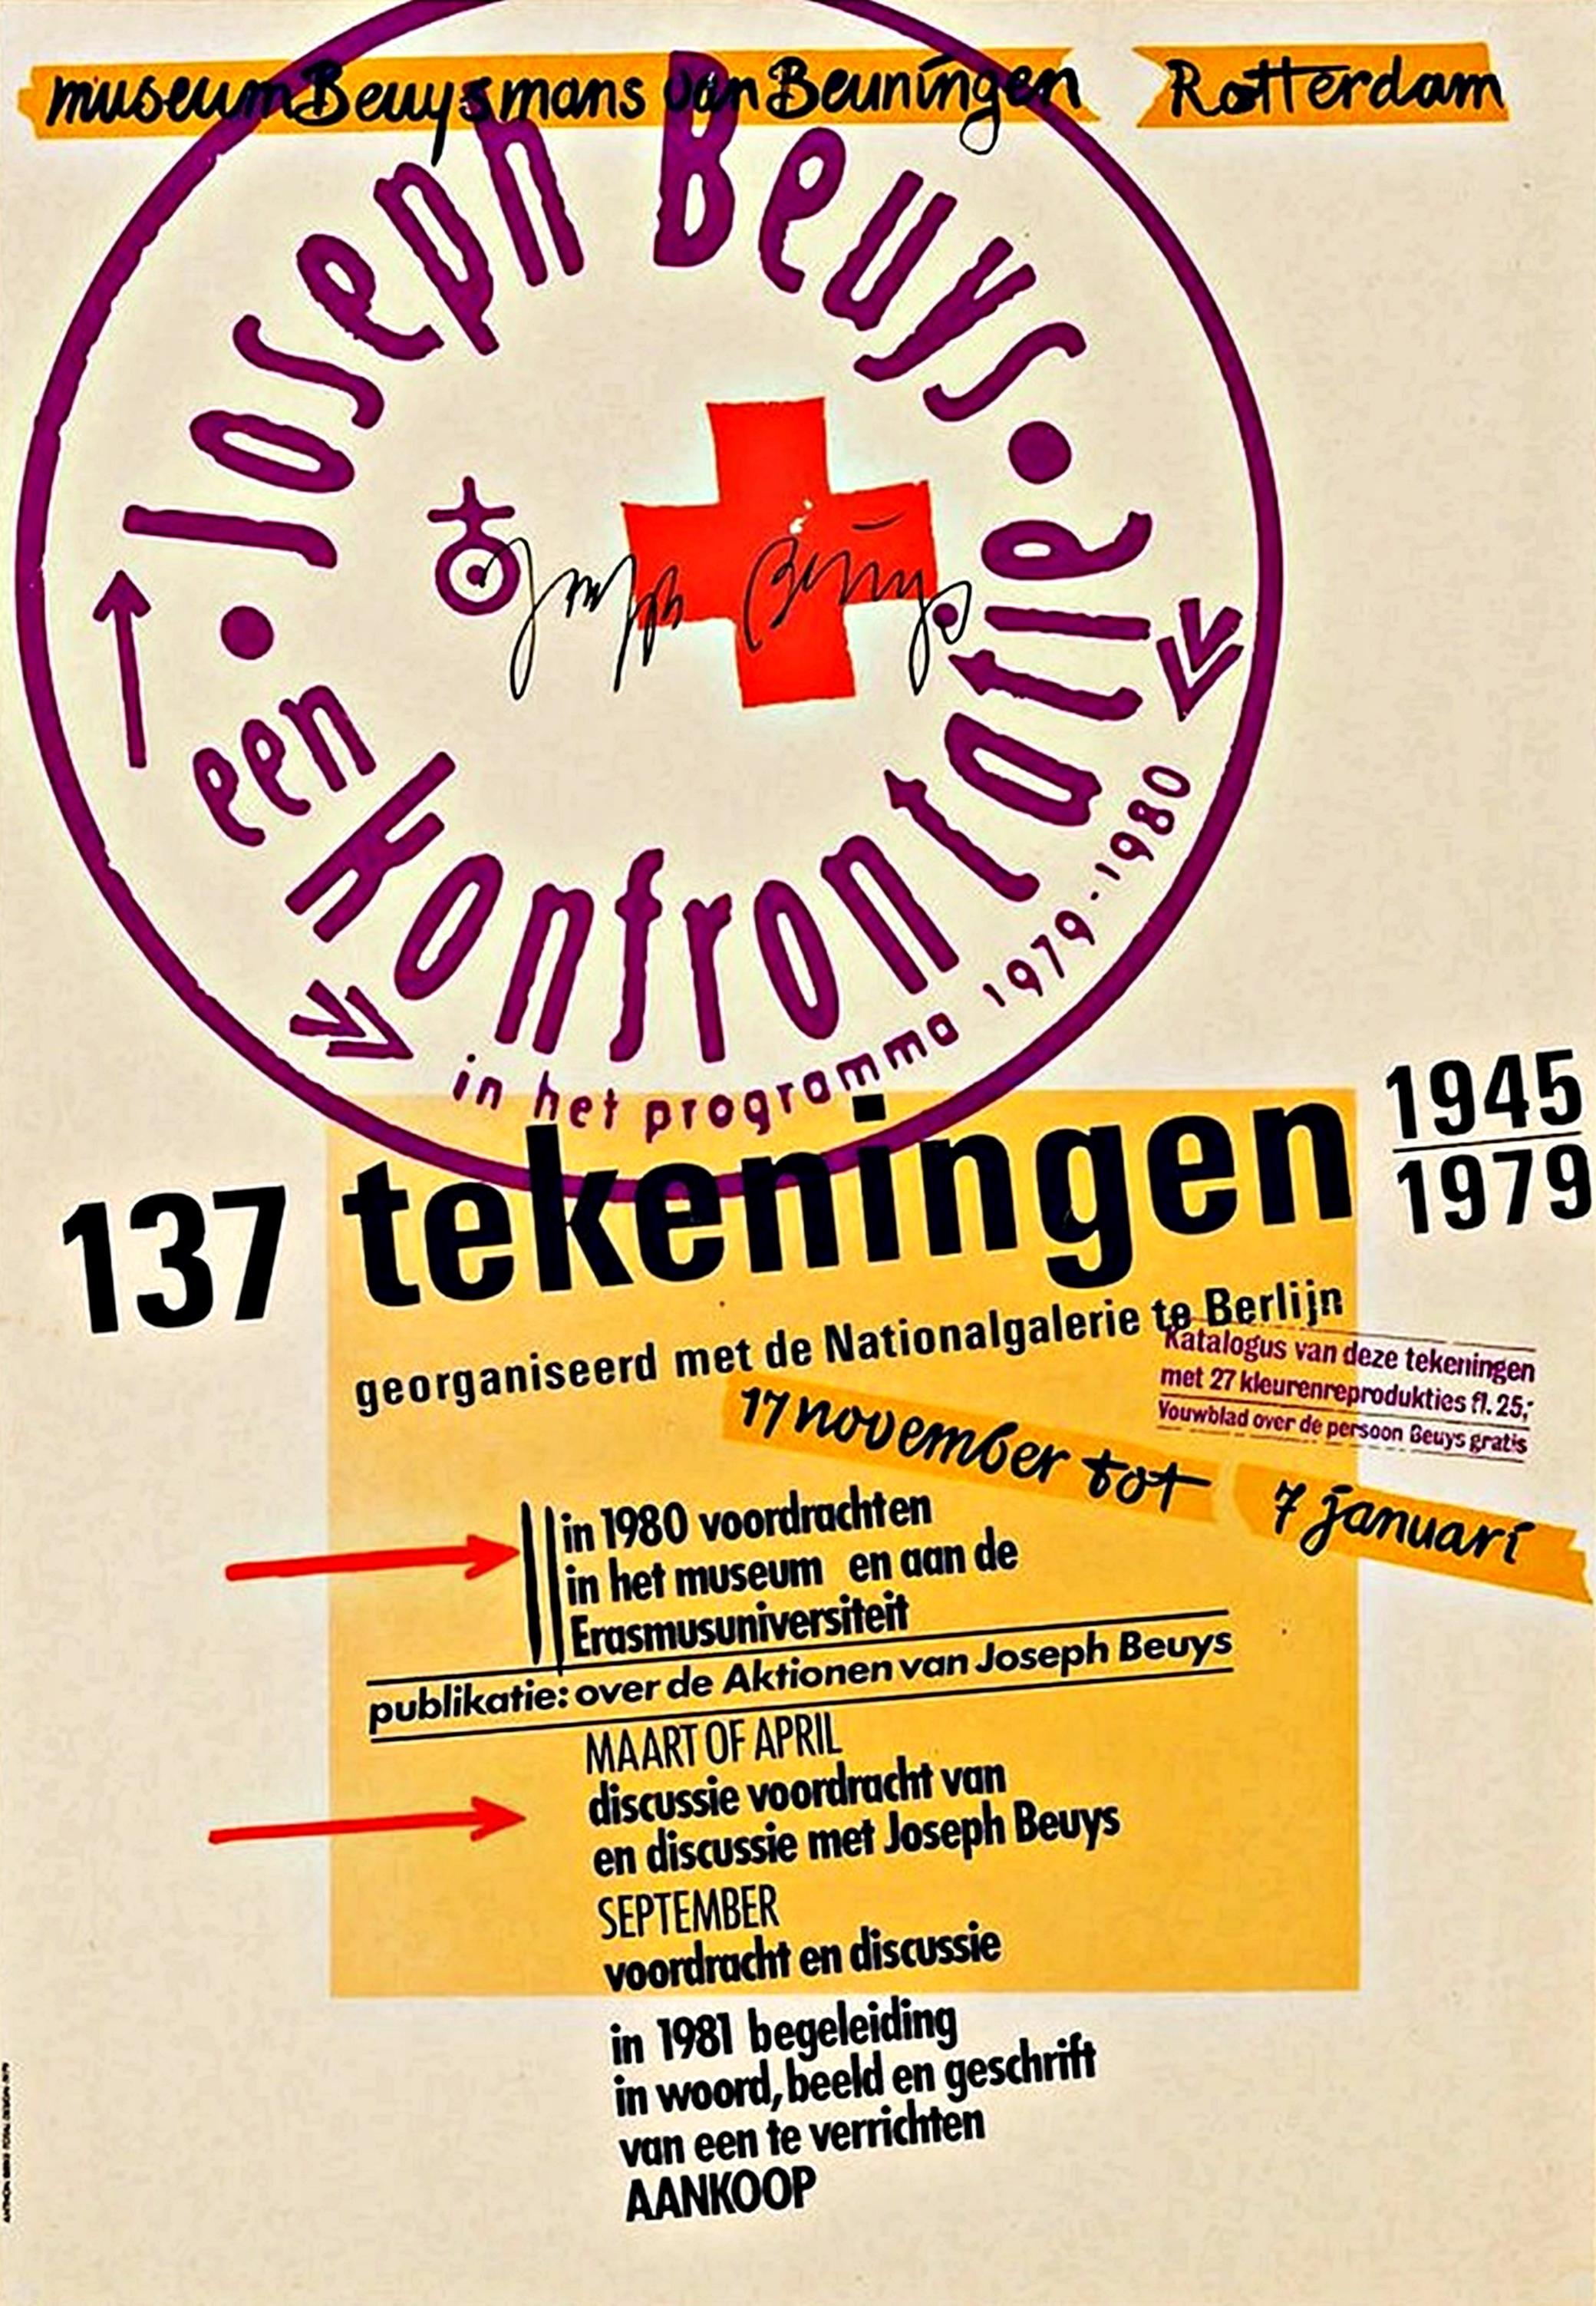 Joseph Beuys
Joseph Beuys, een konfrontatie, 137 Tekeningen 1945-1979, (Hand Signed), 1979
Silkscreen on velincarton (thin board)
Catalogue raisonne reference: Weiss-Britsch 75
Boldly signed on the front by Joseph Beuys in felt tipped marker
(the